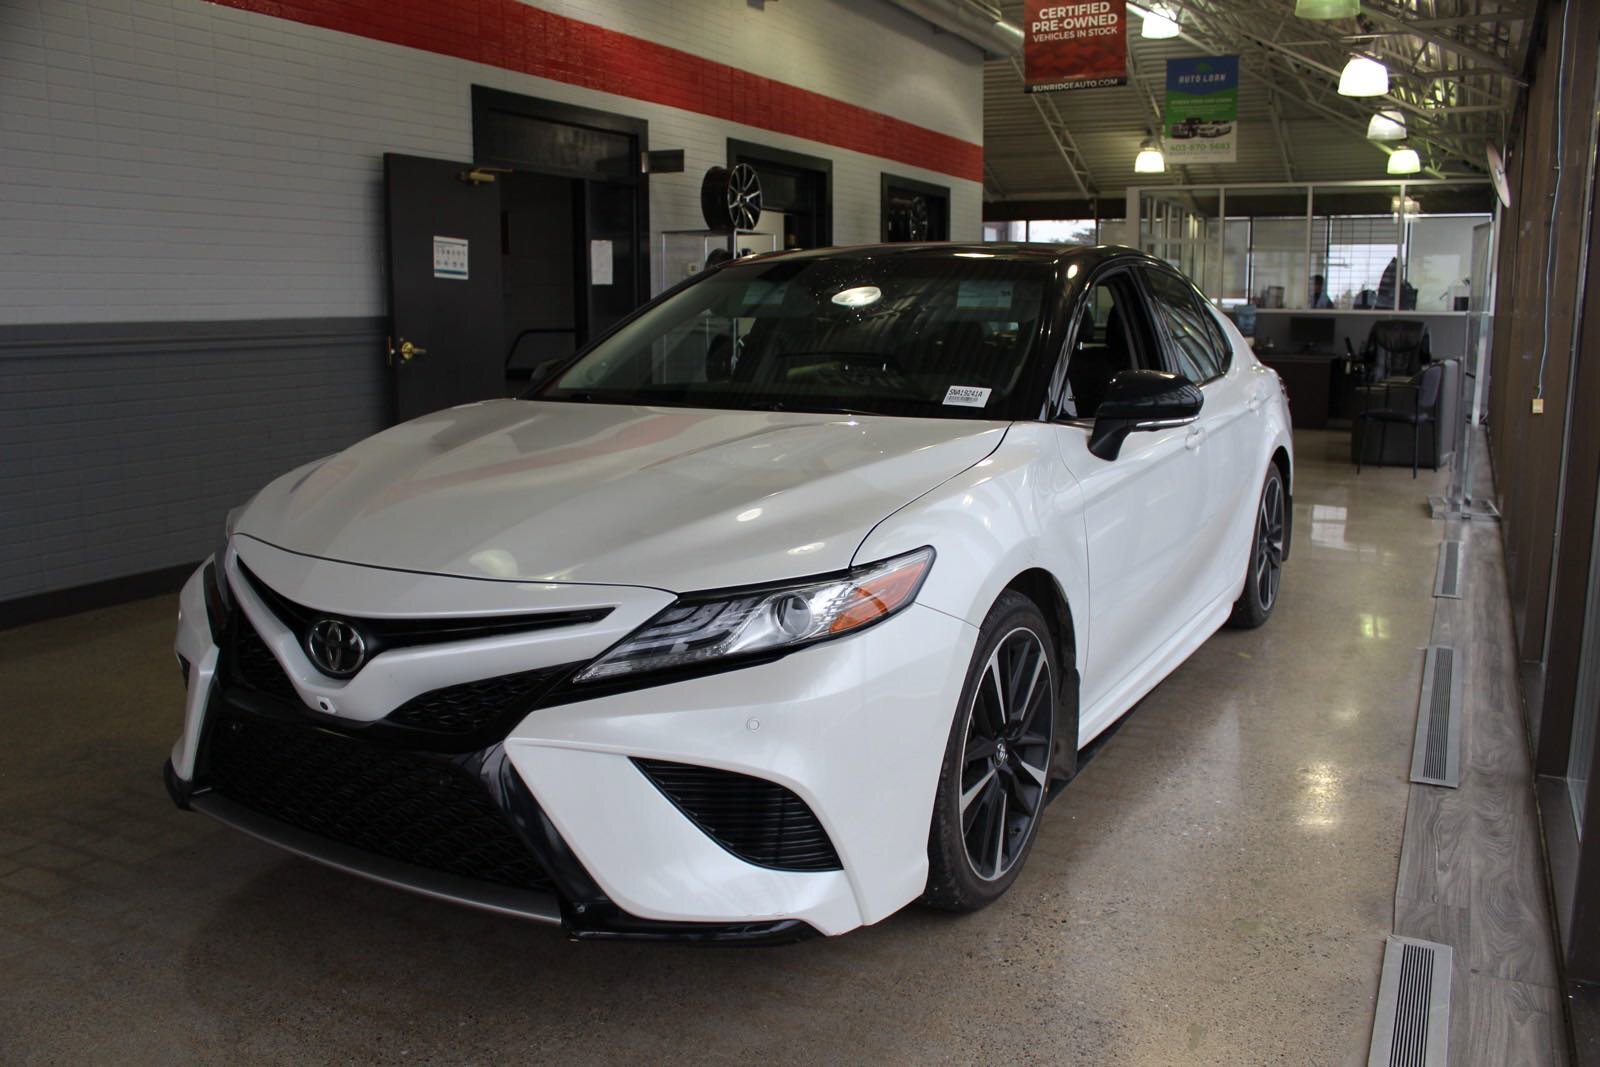 2018 Toyota Camry XSE V6 | MINT CONDITION | LOWEST KMS IN CANADA